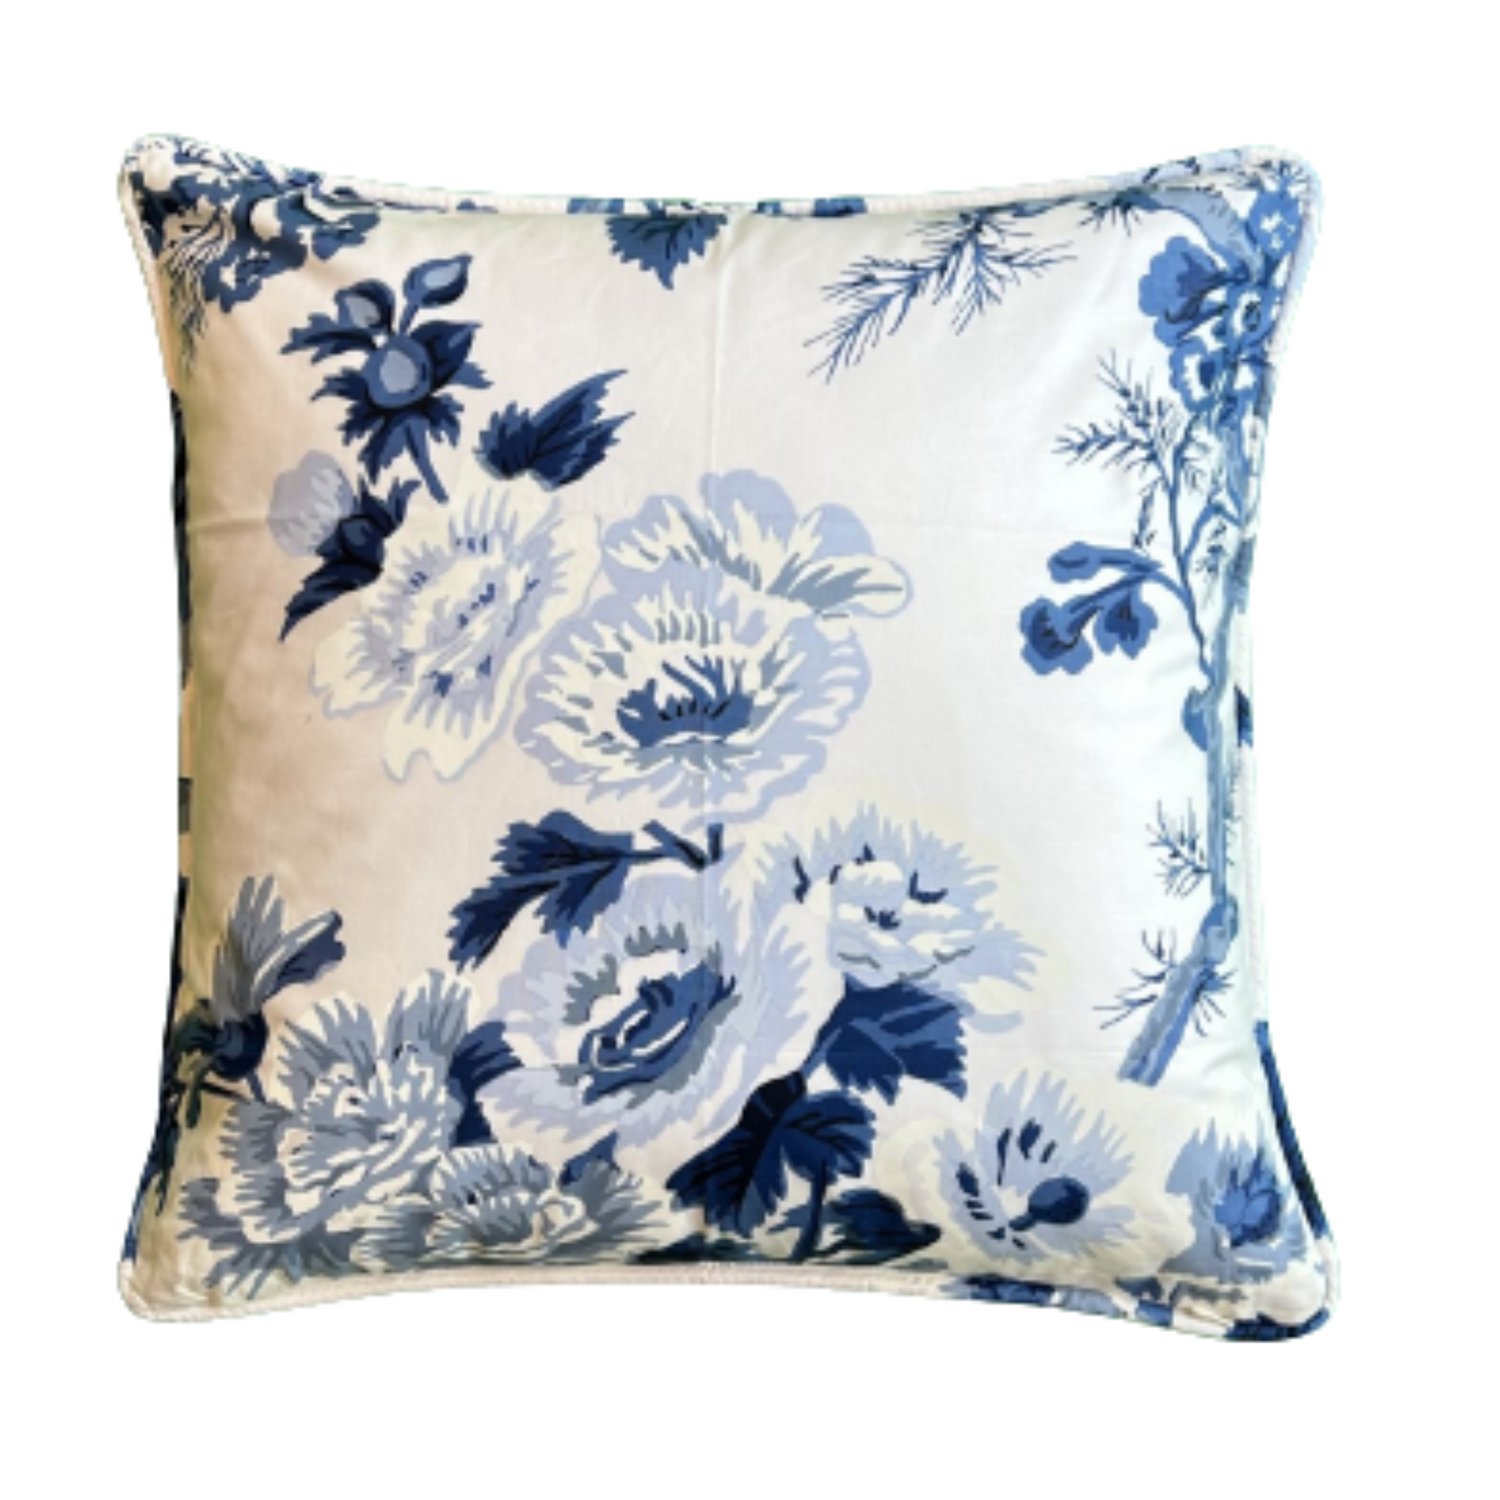 Pyne Hollyhock Iconic Print 18 x 18 Square Decorative Pillow with Down Feather Insert